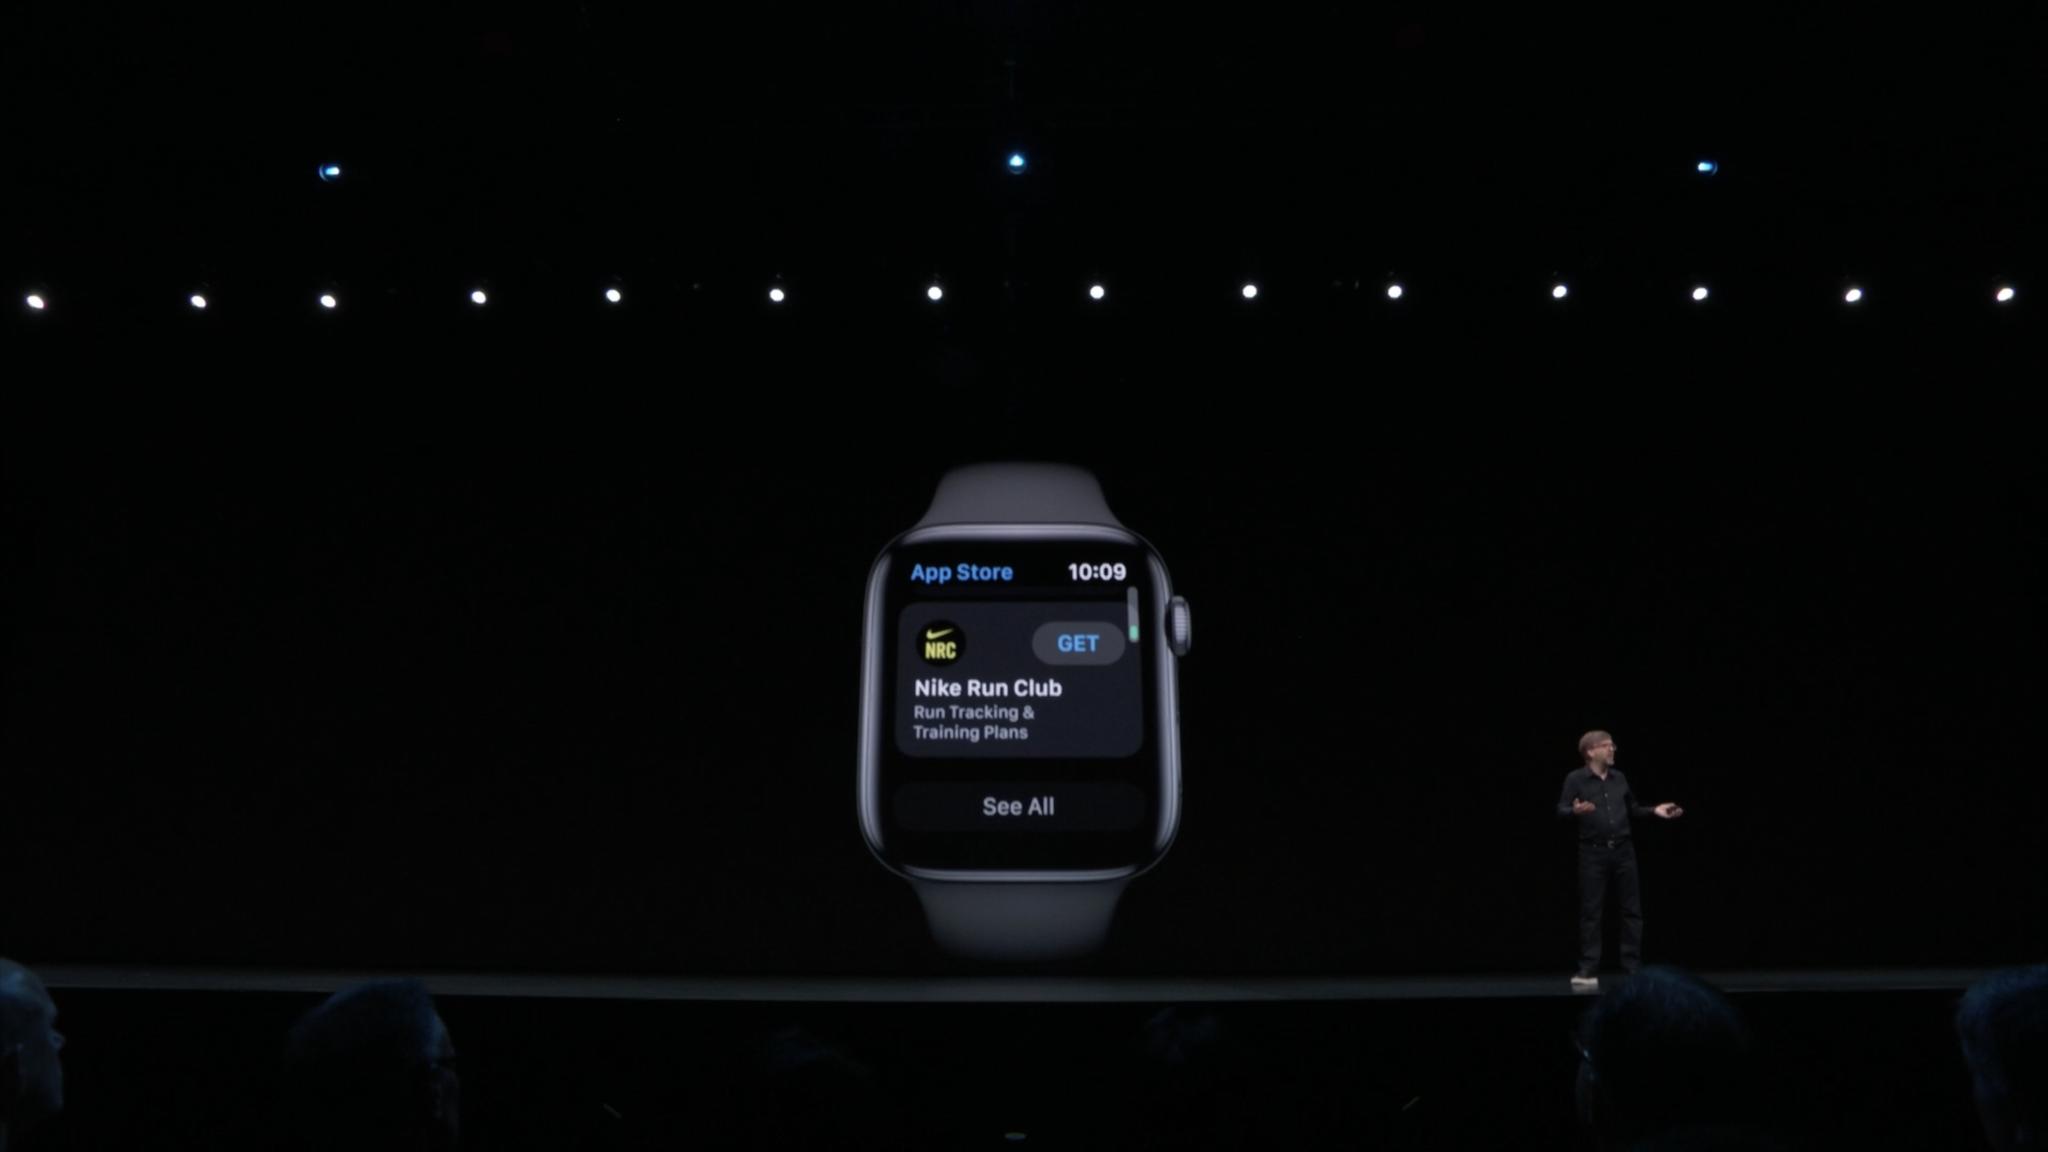 Apple Watch App Store: Everything you need to know